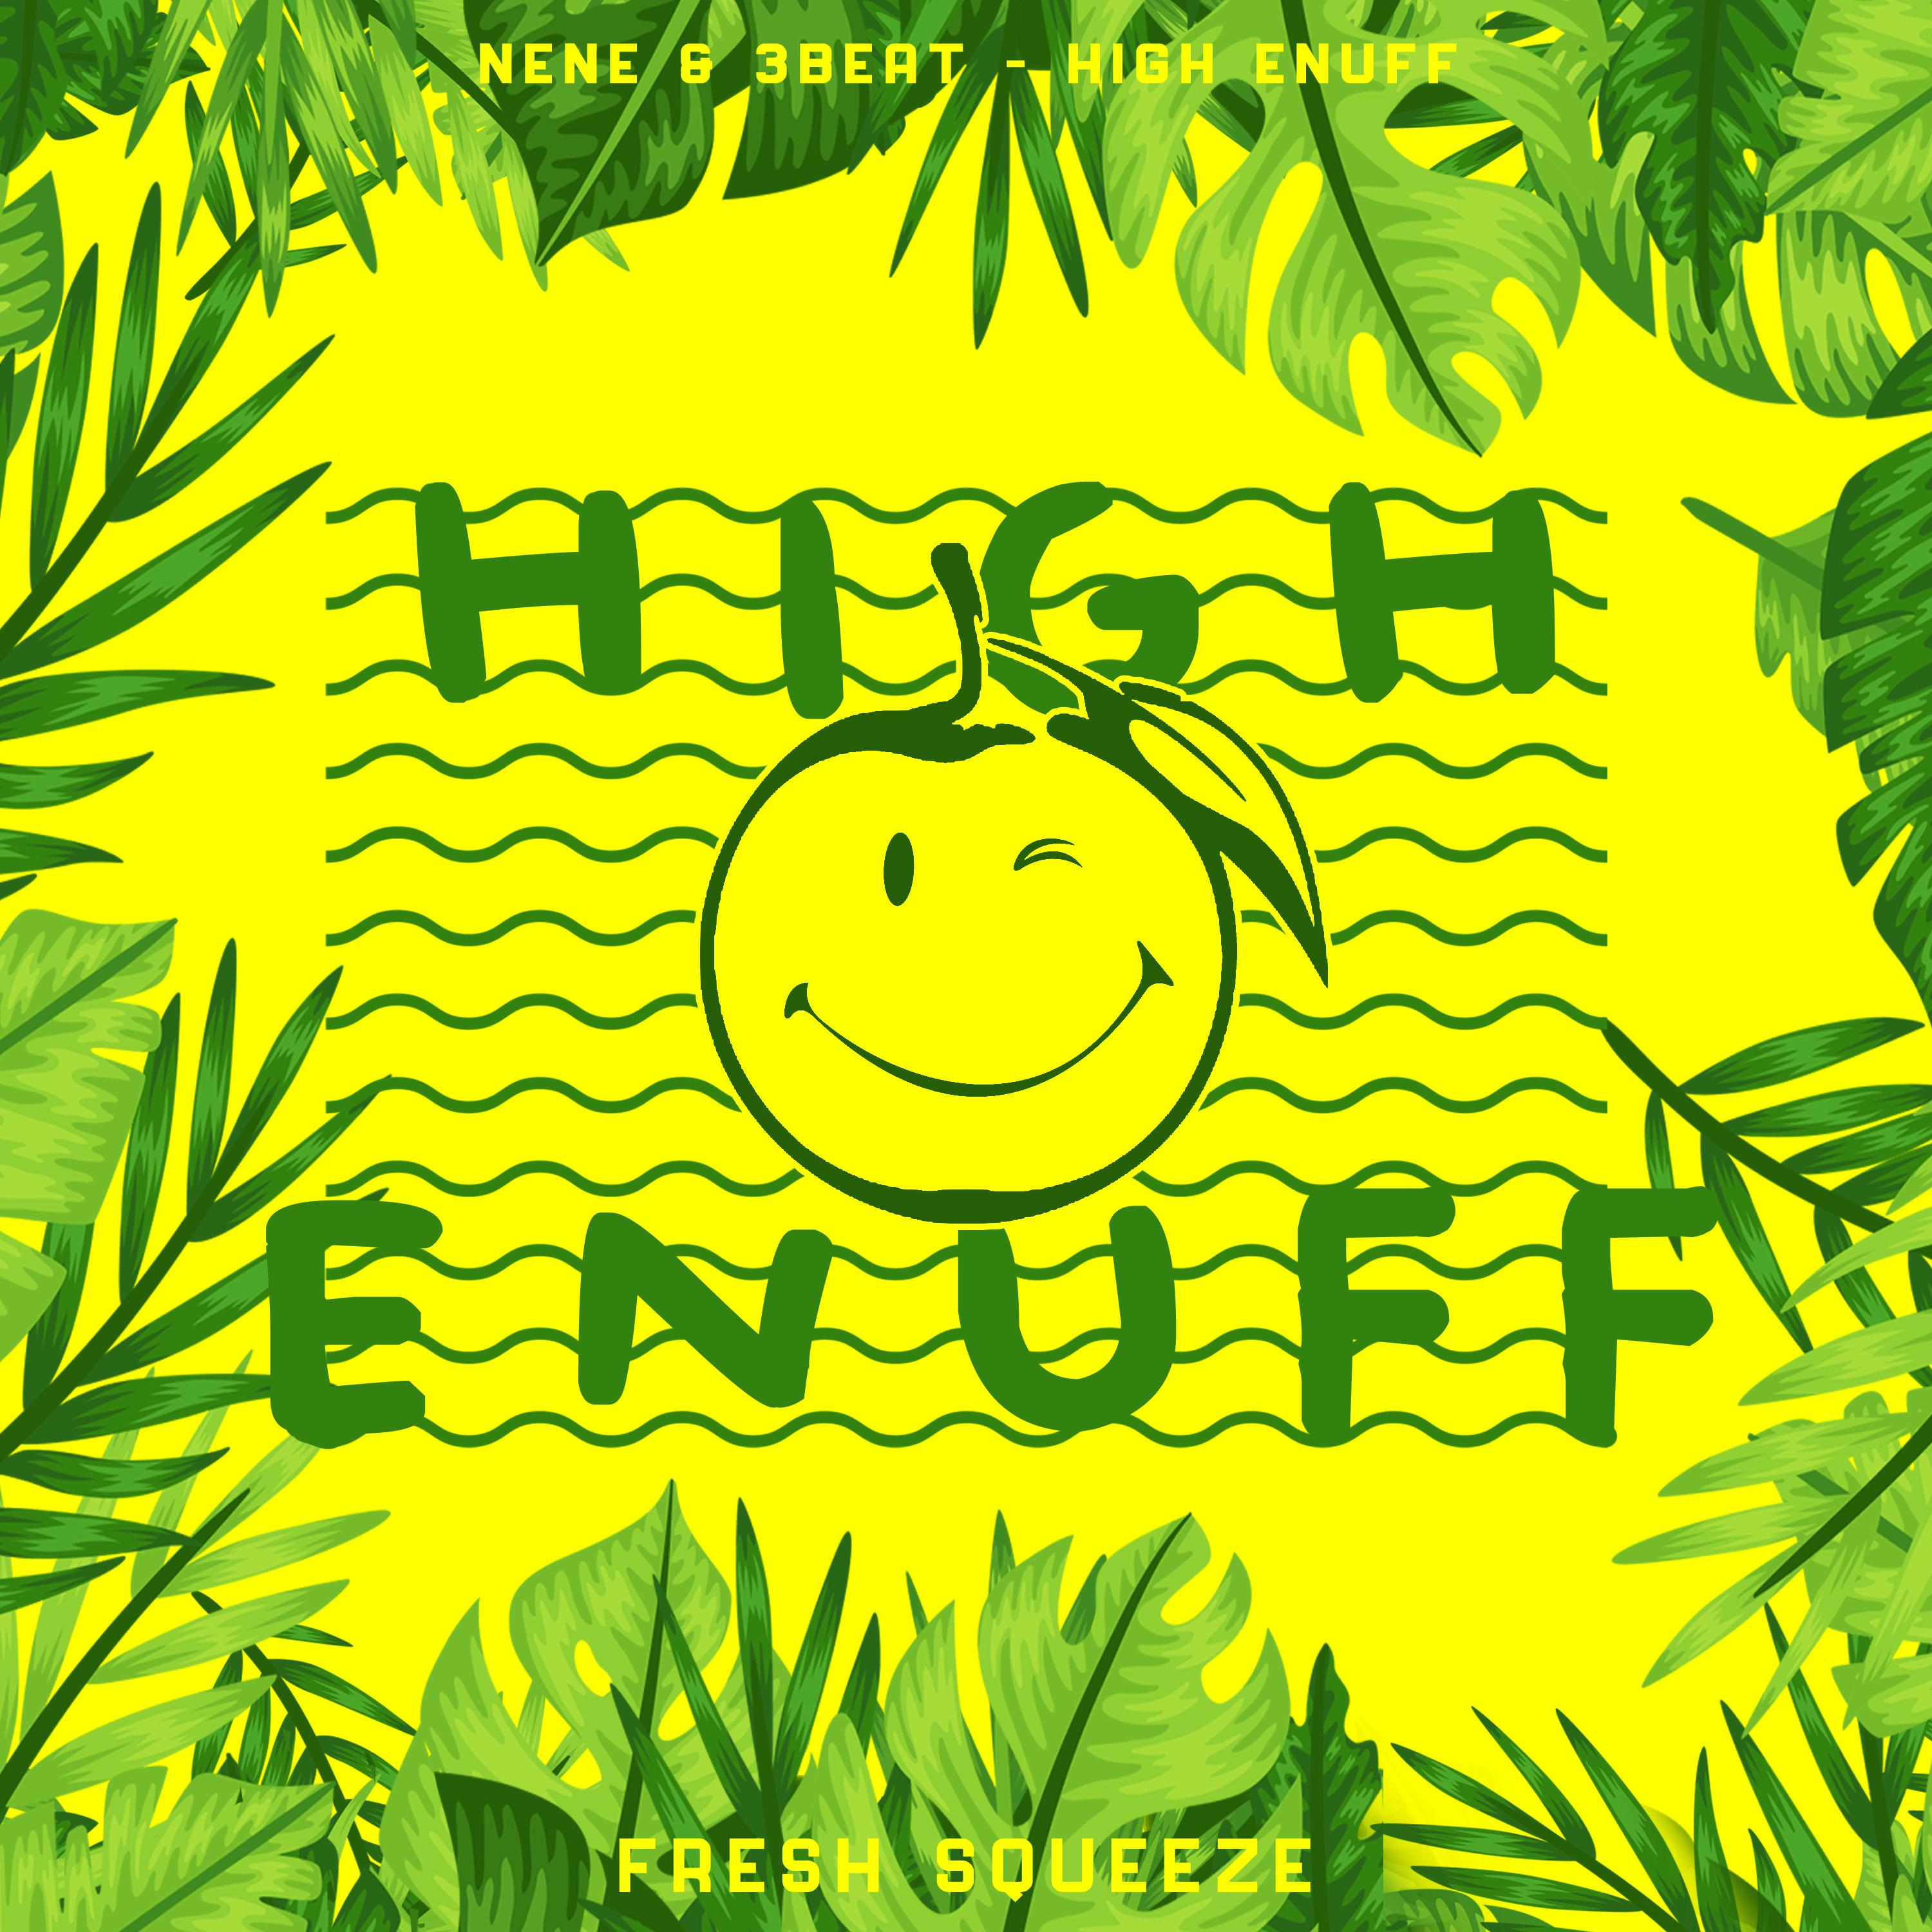 NENE - High Enuff (Extended Mix)